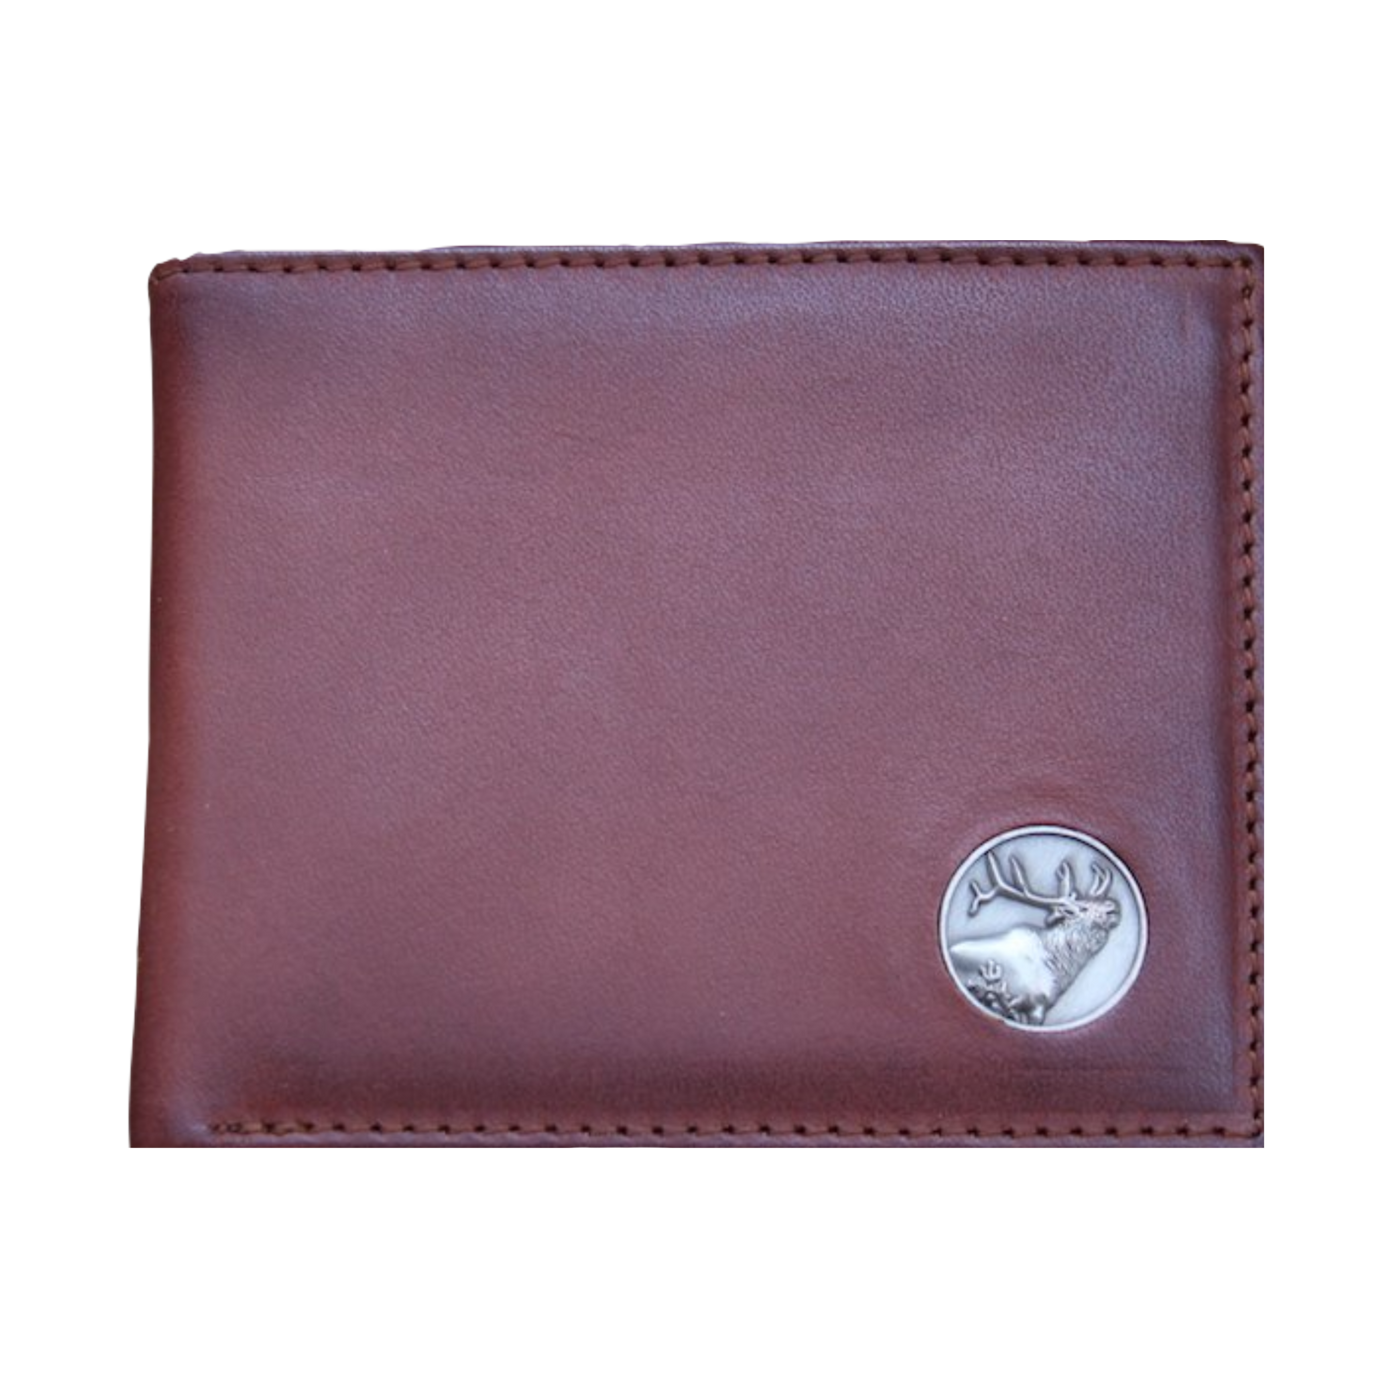 The Wildlife Bifold Elk Wallet is created from hand-burnished, rich full grain leather, providing a beautiful aged patina. The elk concho provides a personalized touch...stylish and unique, this piece is a must-have for any collection! 8 Card Slots 3 Storage Pockets 2 ID Windows Leather Tipped Bill Divider Weber's Signature Elk Concho Dimensions: 4.5"L x 3.5"H RFID Protection Color: Caramel